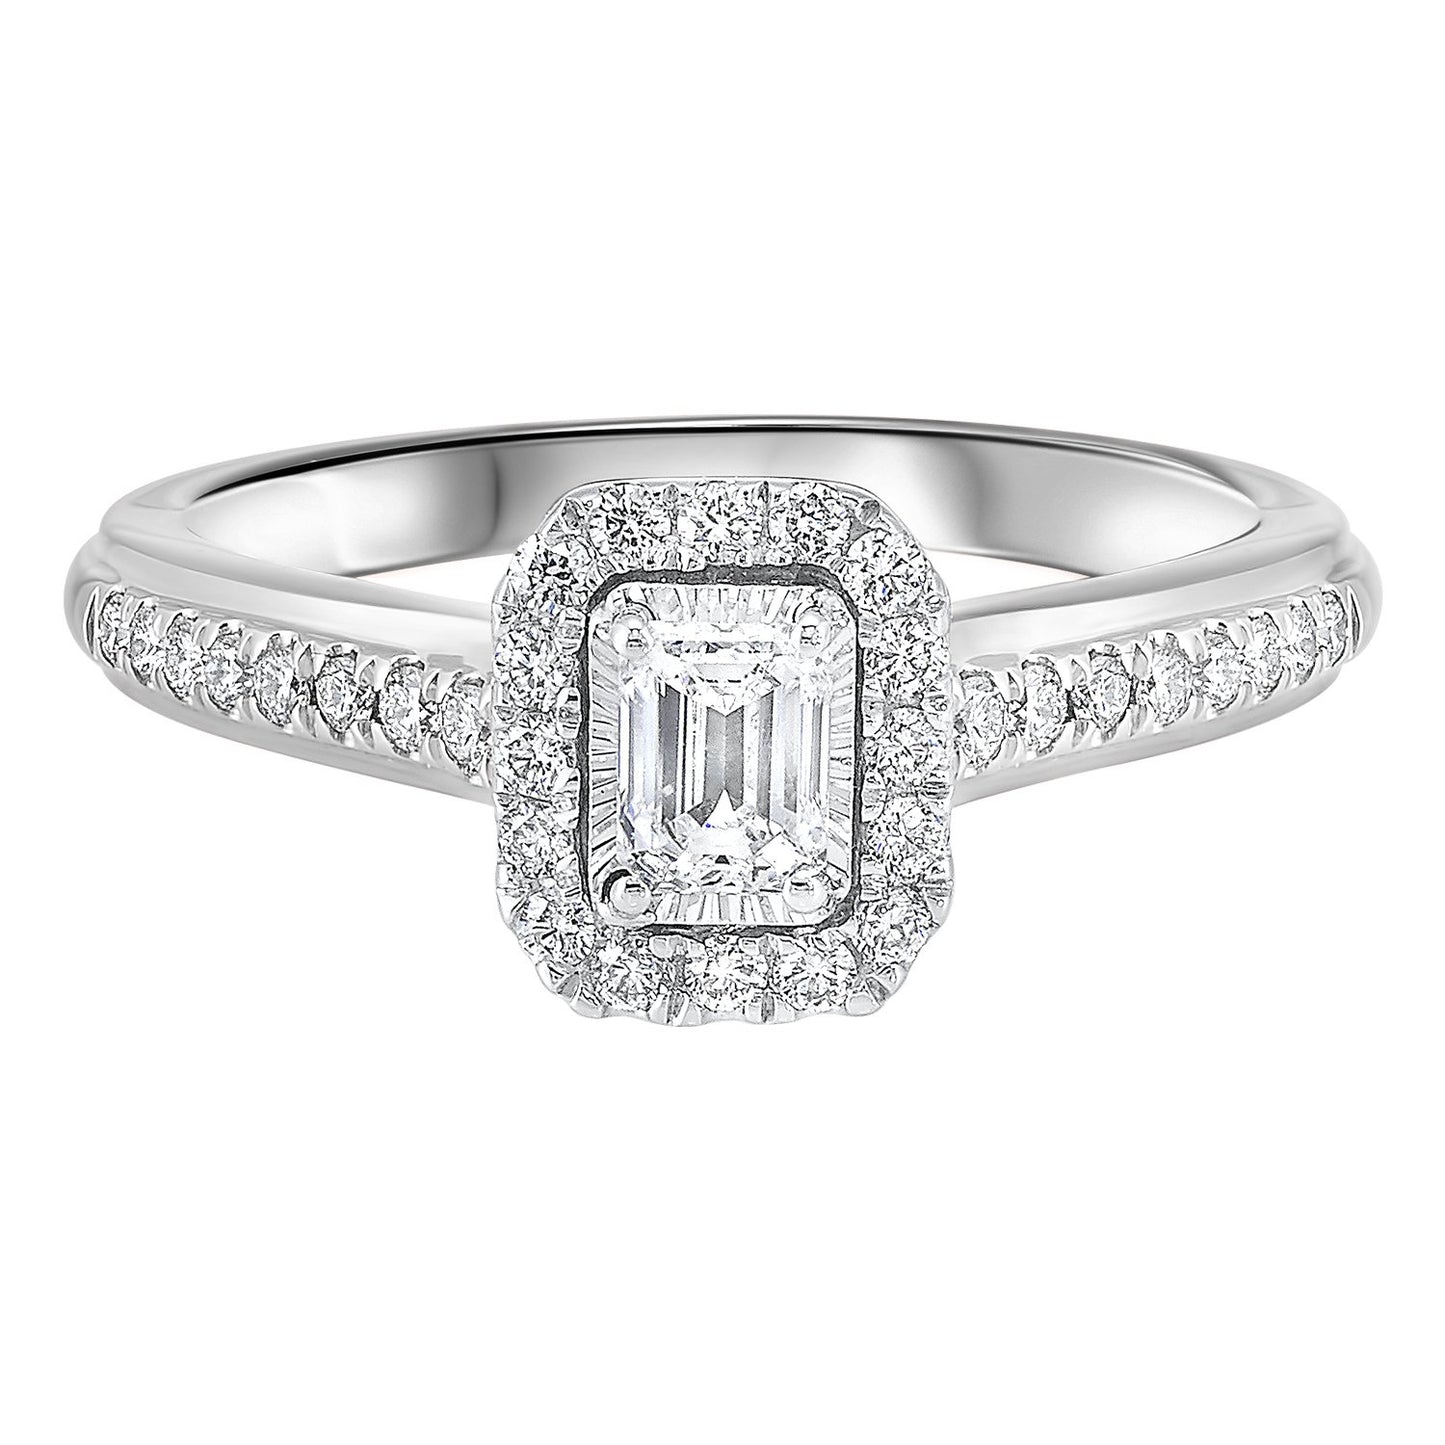 14K White 1/2ctw Emerald Cut Ring with 1/3 center